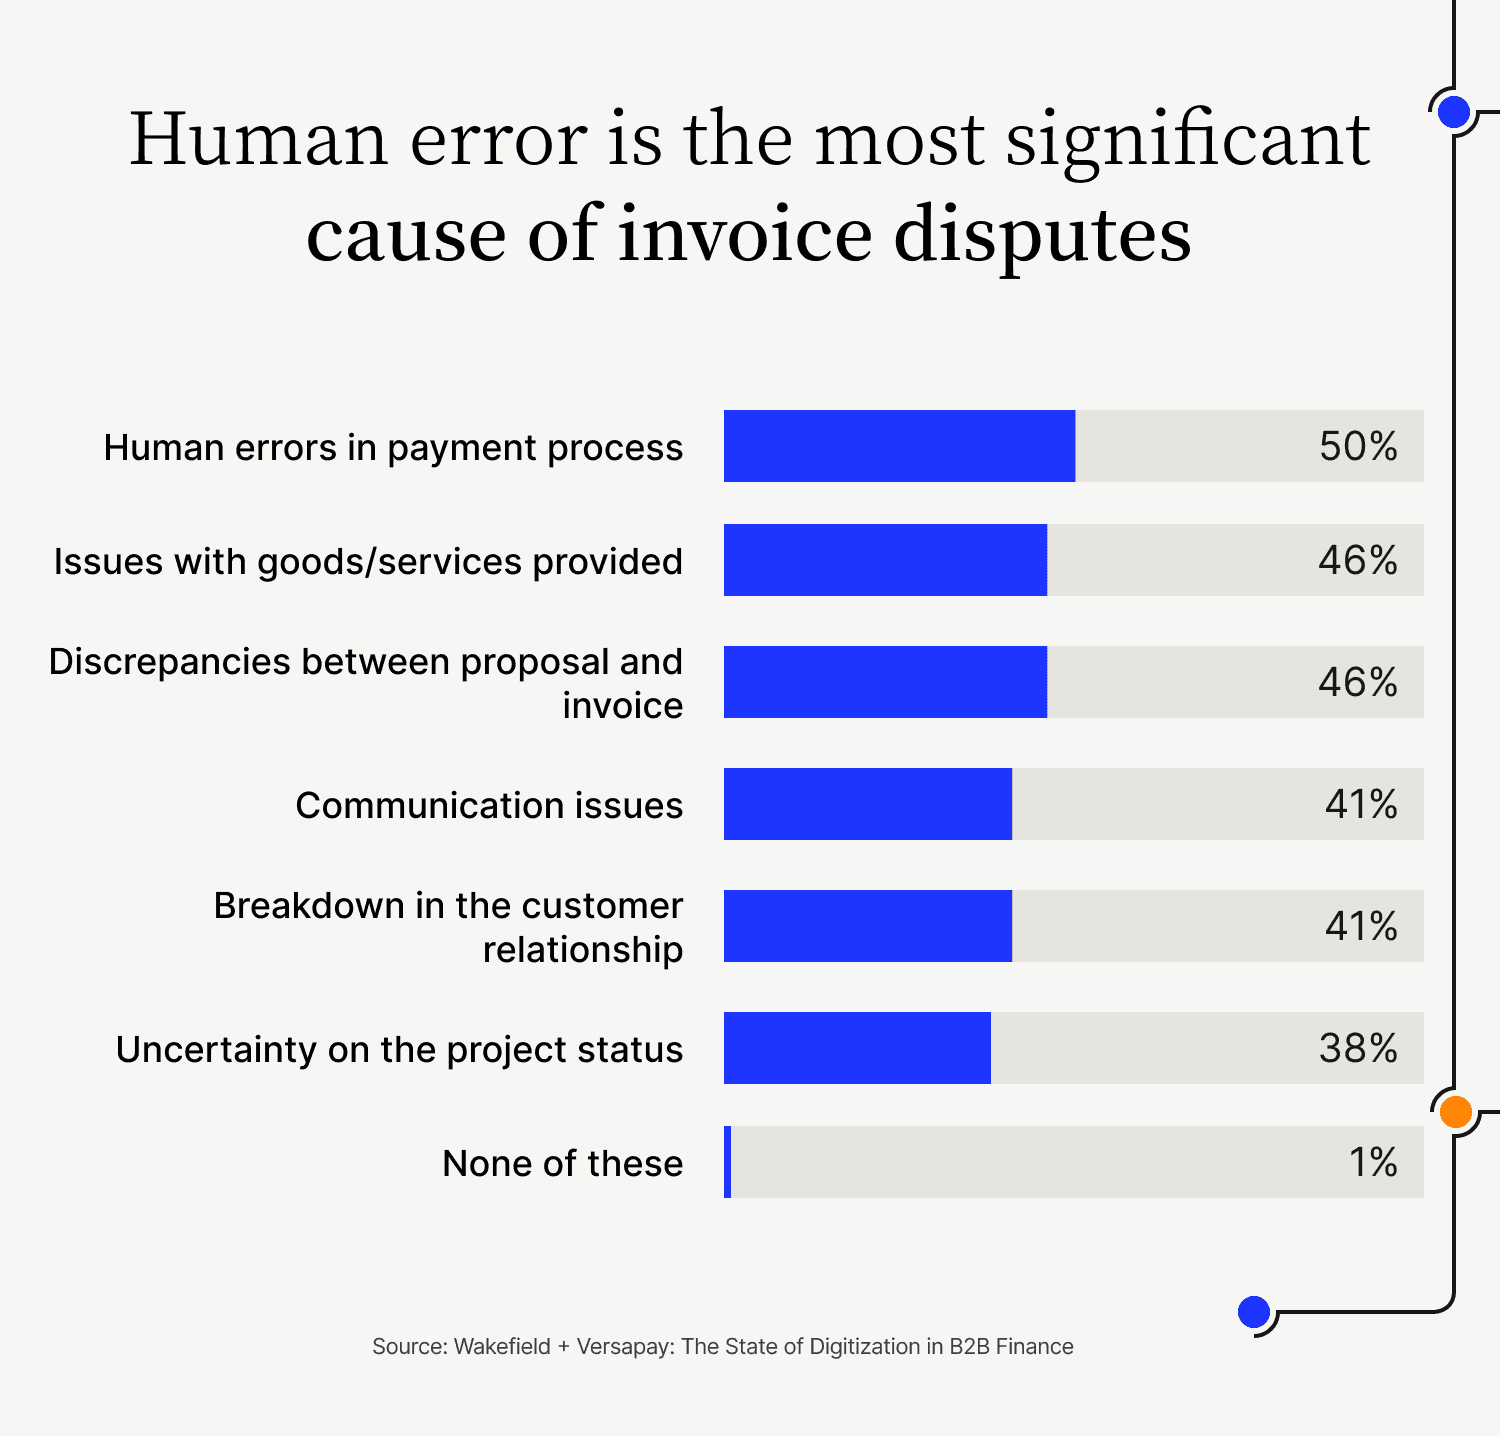 Human error is the most significant cause of invoice disputes